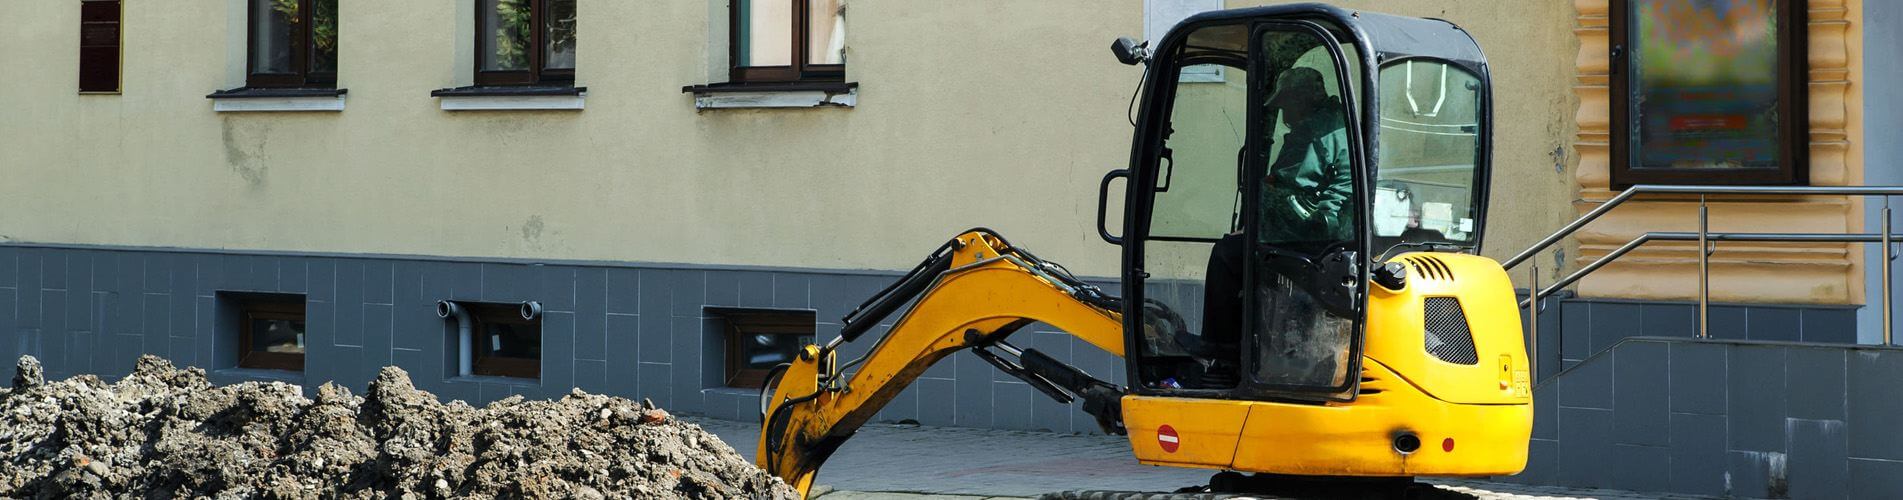 Did you know we also have mini diggers for hire?<br/>Call us today on 01322 340802!